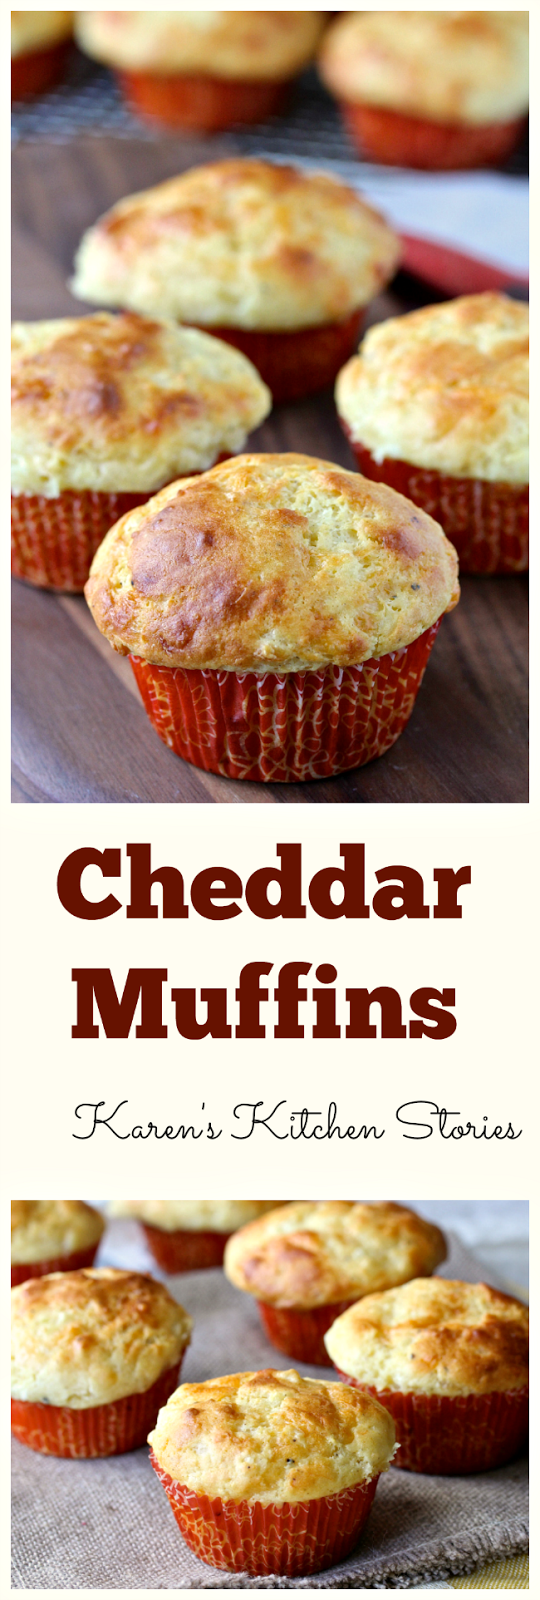 These cheddar muffins are loaded with cheese and flavored with shallots, just a bit of cornmeal, Dijon mustard, freshly ground black pepper, and Tabasco sauce. They have just the right amount of kick.